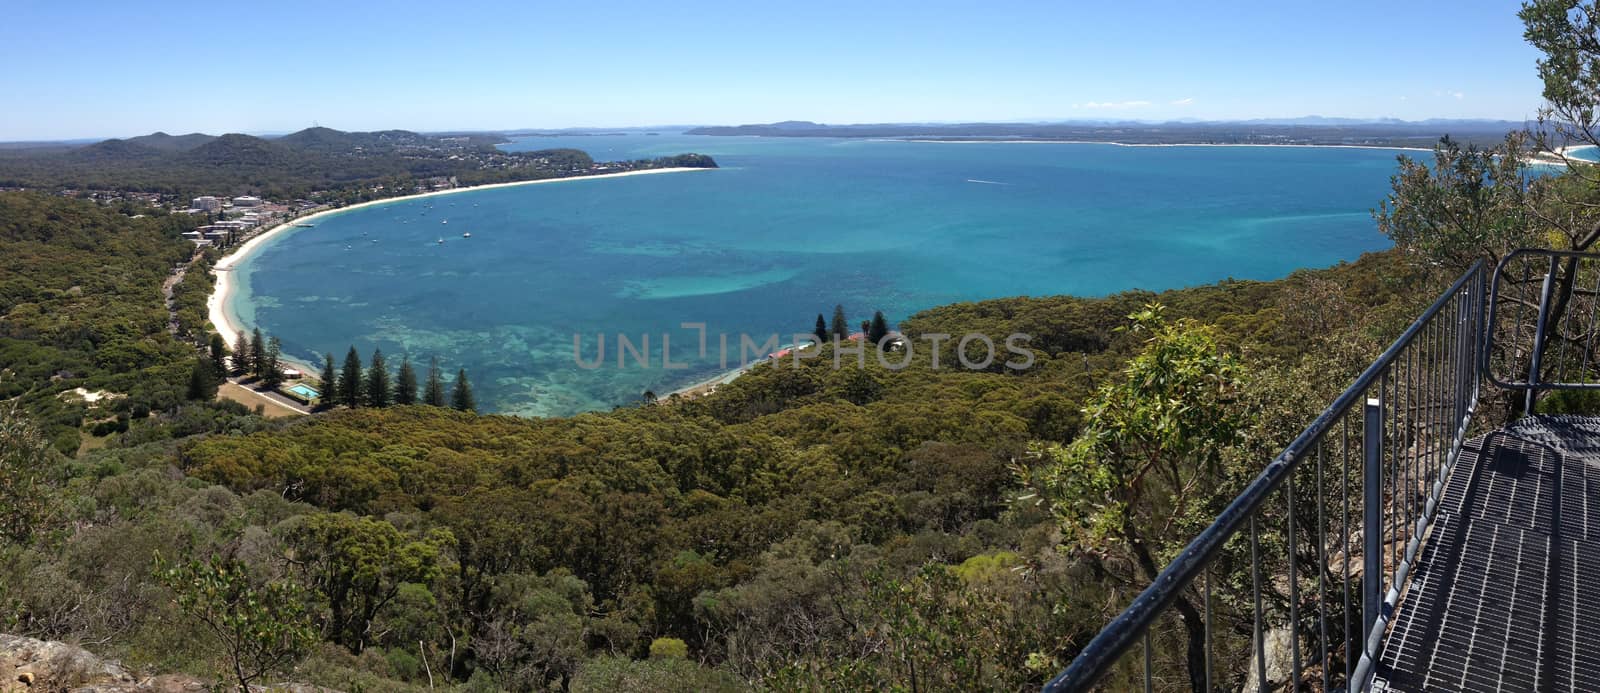 Shoal Bay scenic views from Mt Tomaree, Australia by lovleah